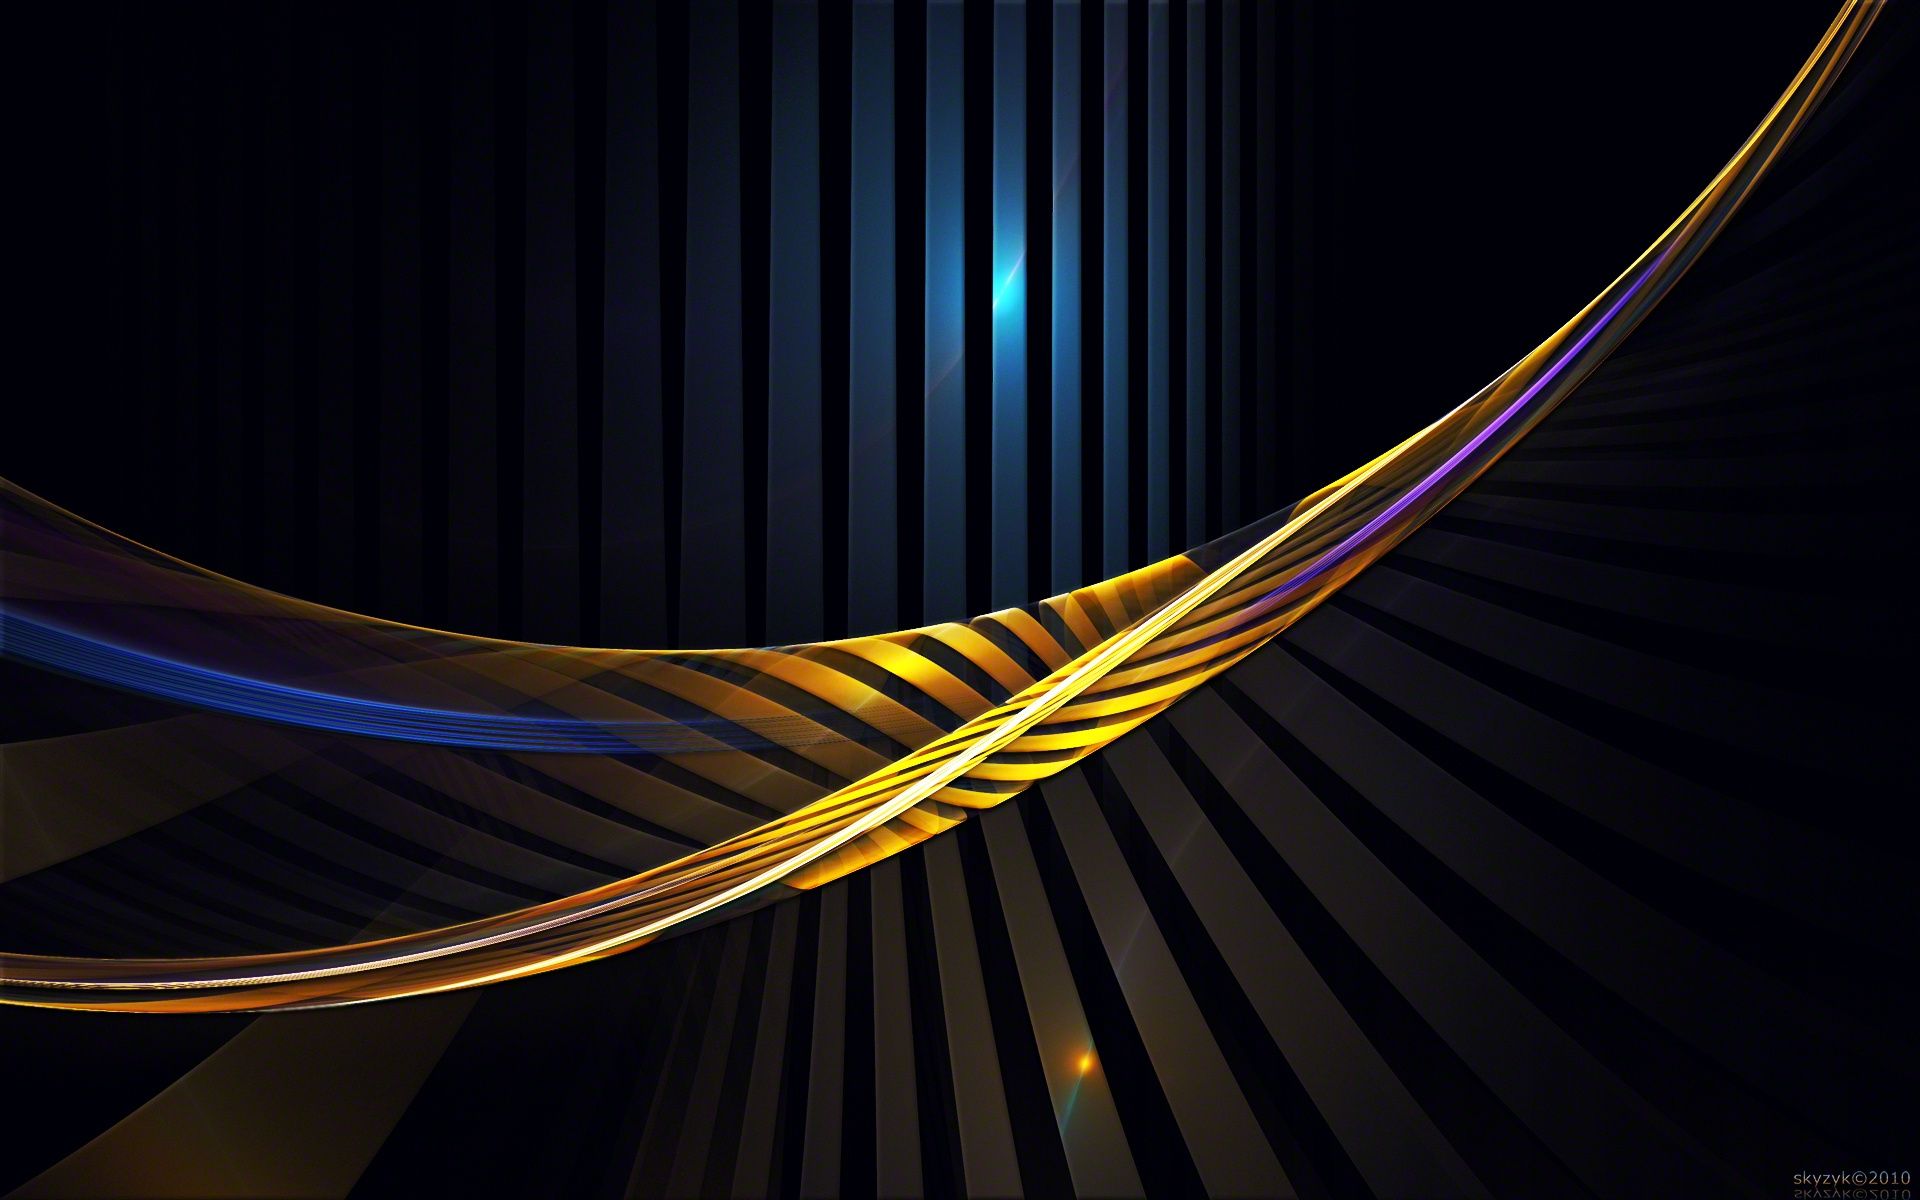 Abstract Lines wallpaper | 1920x1200 | #73907